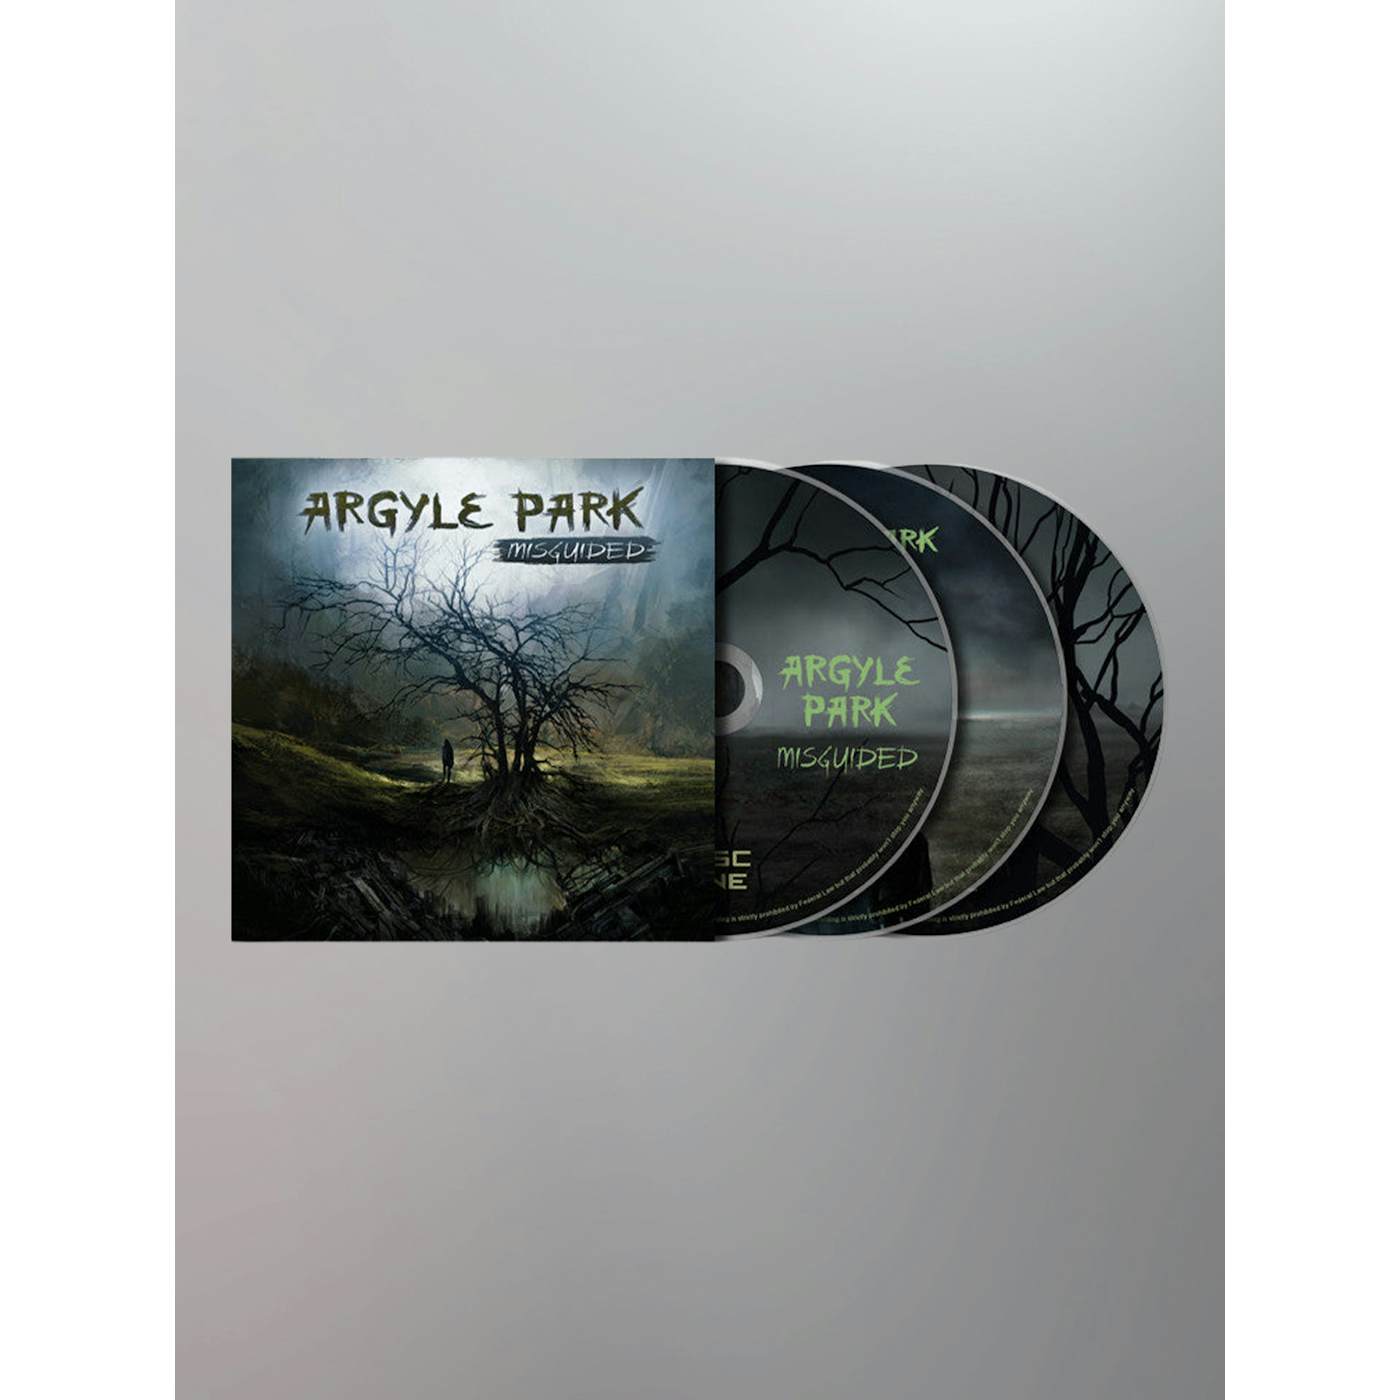 Circle of Dust Argyle Park - Misguided (Remastered) CD